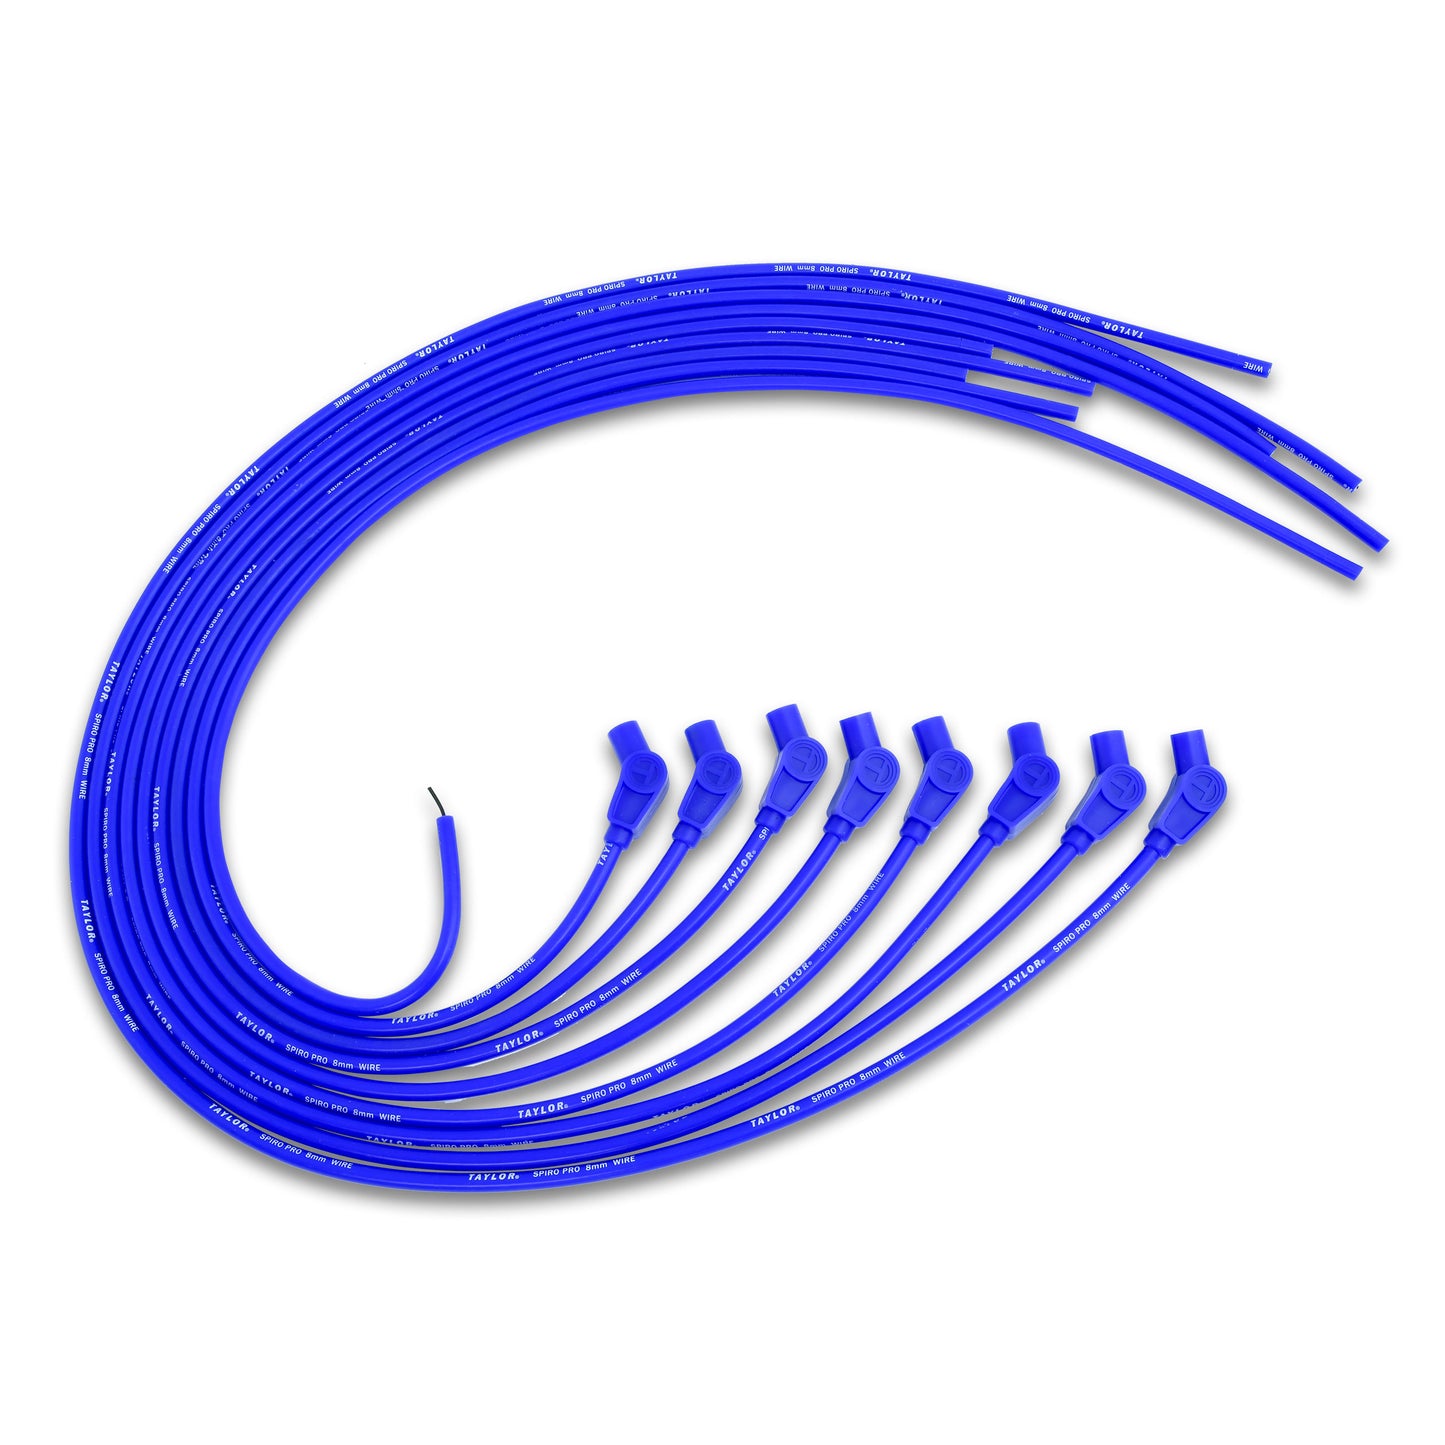 Taylor Cable 73653 8mm Spiro-Pro Ignition Wires univ 8 cyl 135 blue